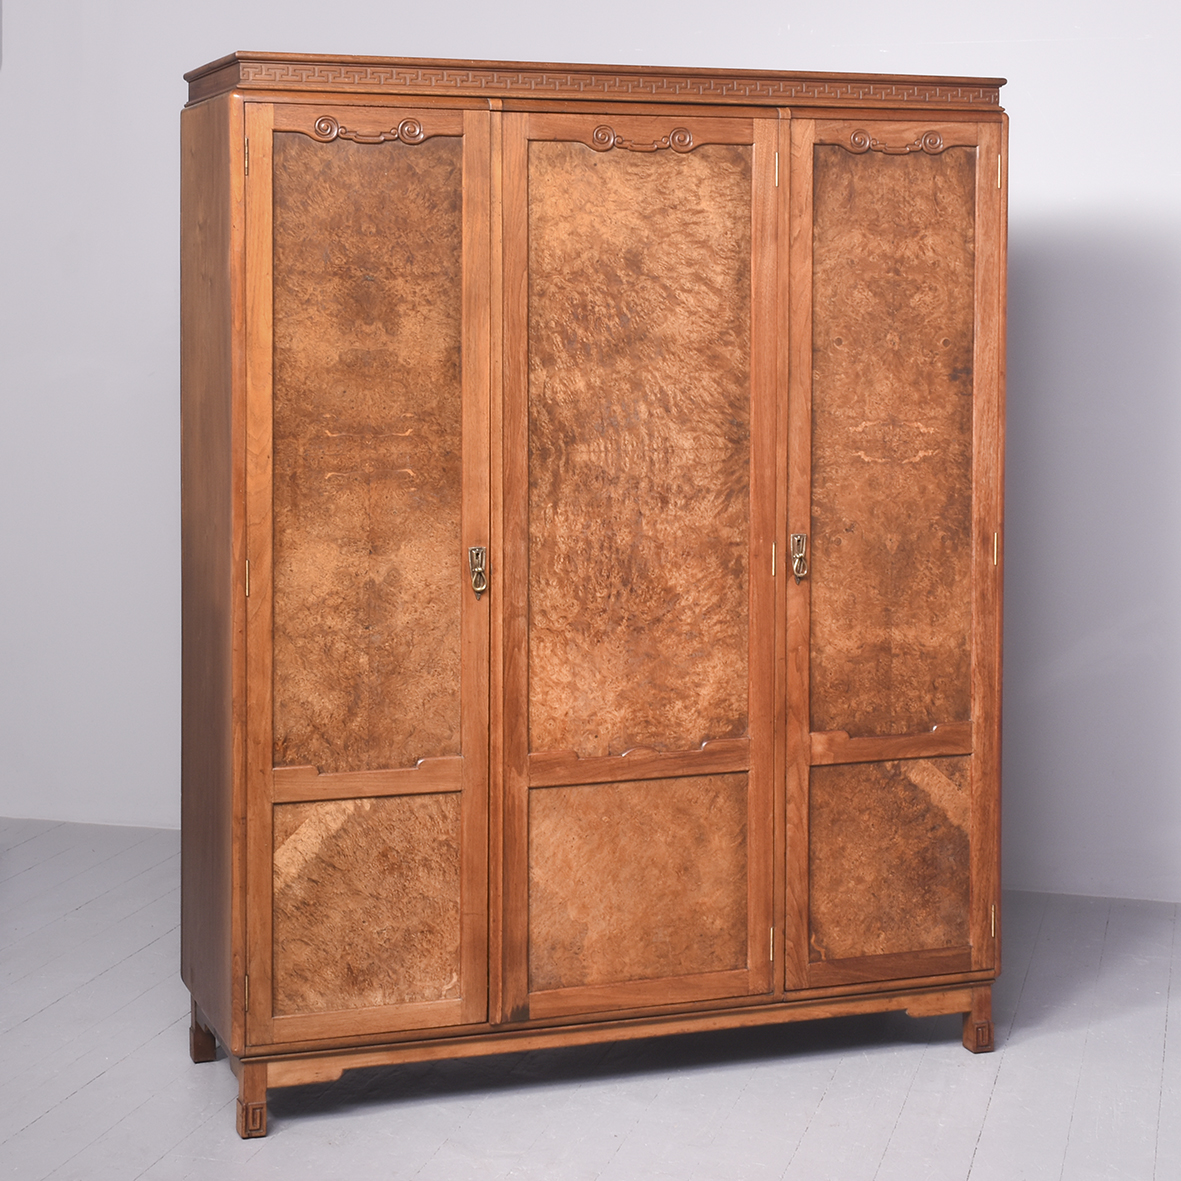 Three Door Art Deco Influence Burr Walnut Wardrobe by Famous Cabinetmakers Wylie & Lochhead of Glasgow Antique Furniture